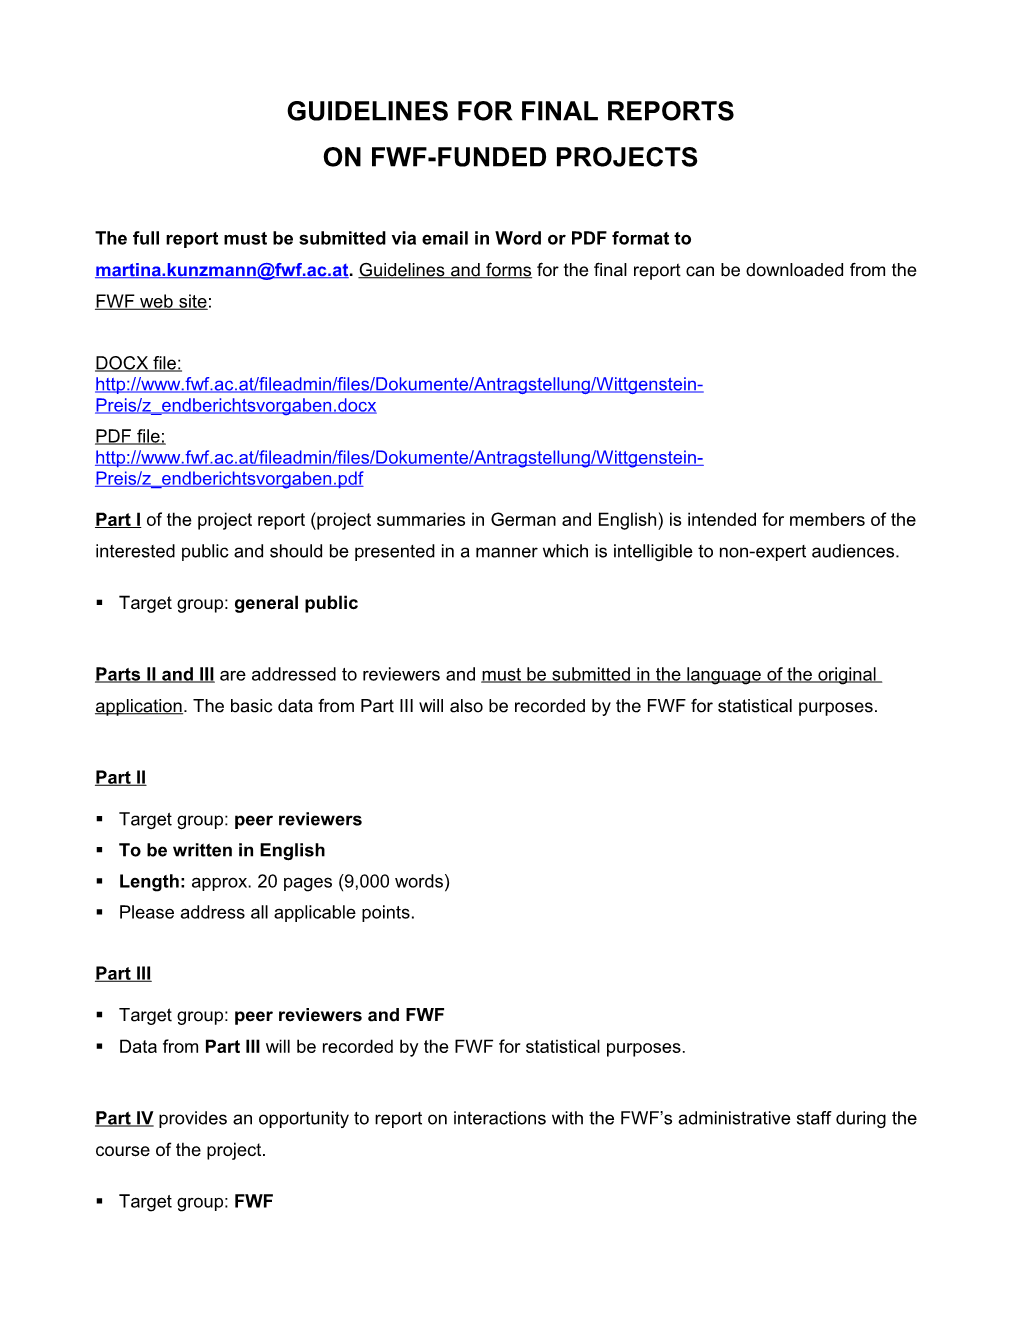 Guidelines for Final Reports on Fwf-Funded Projects